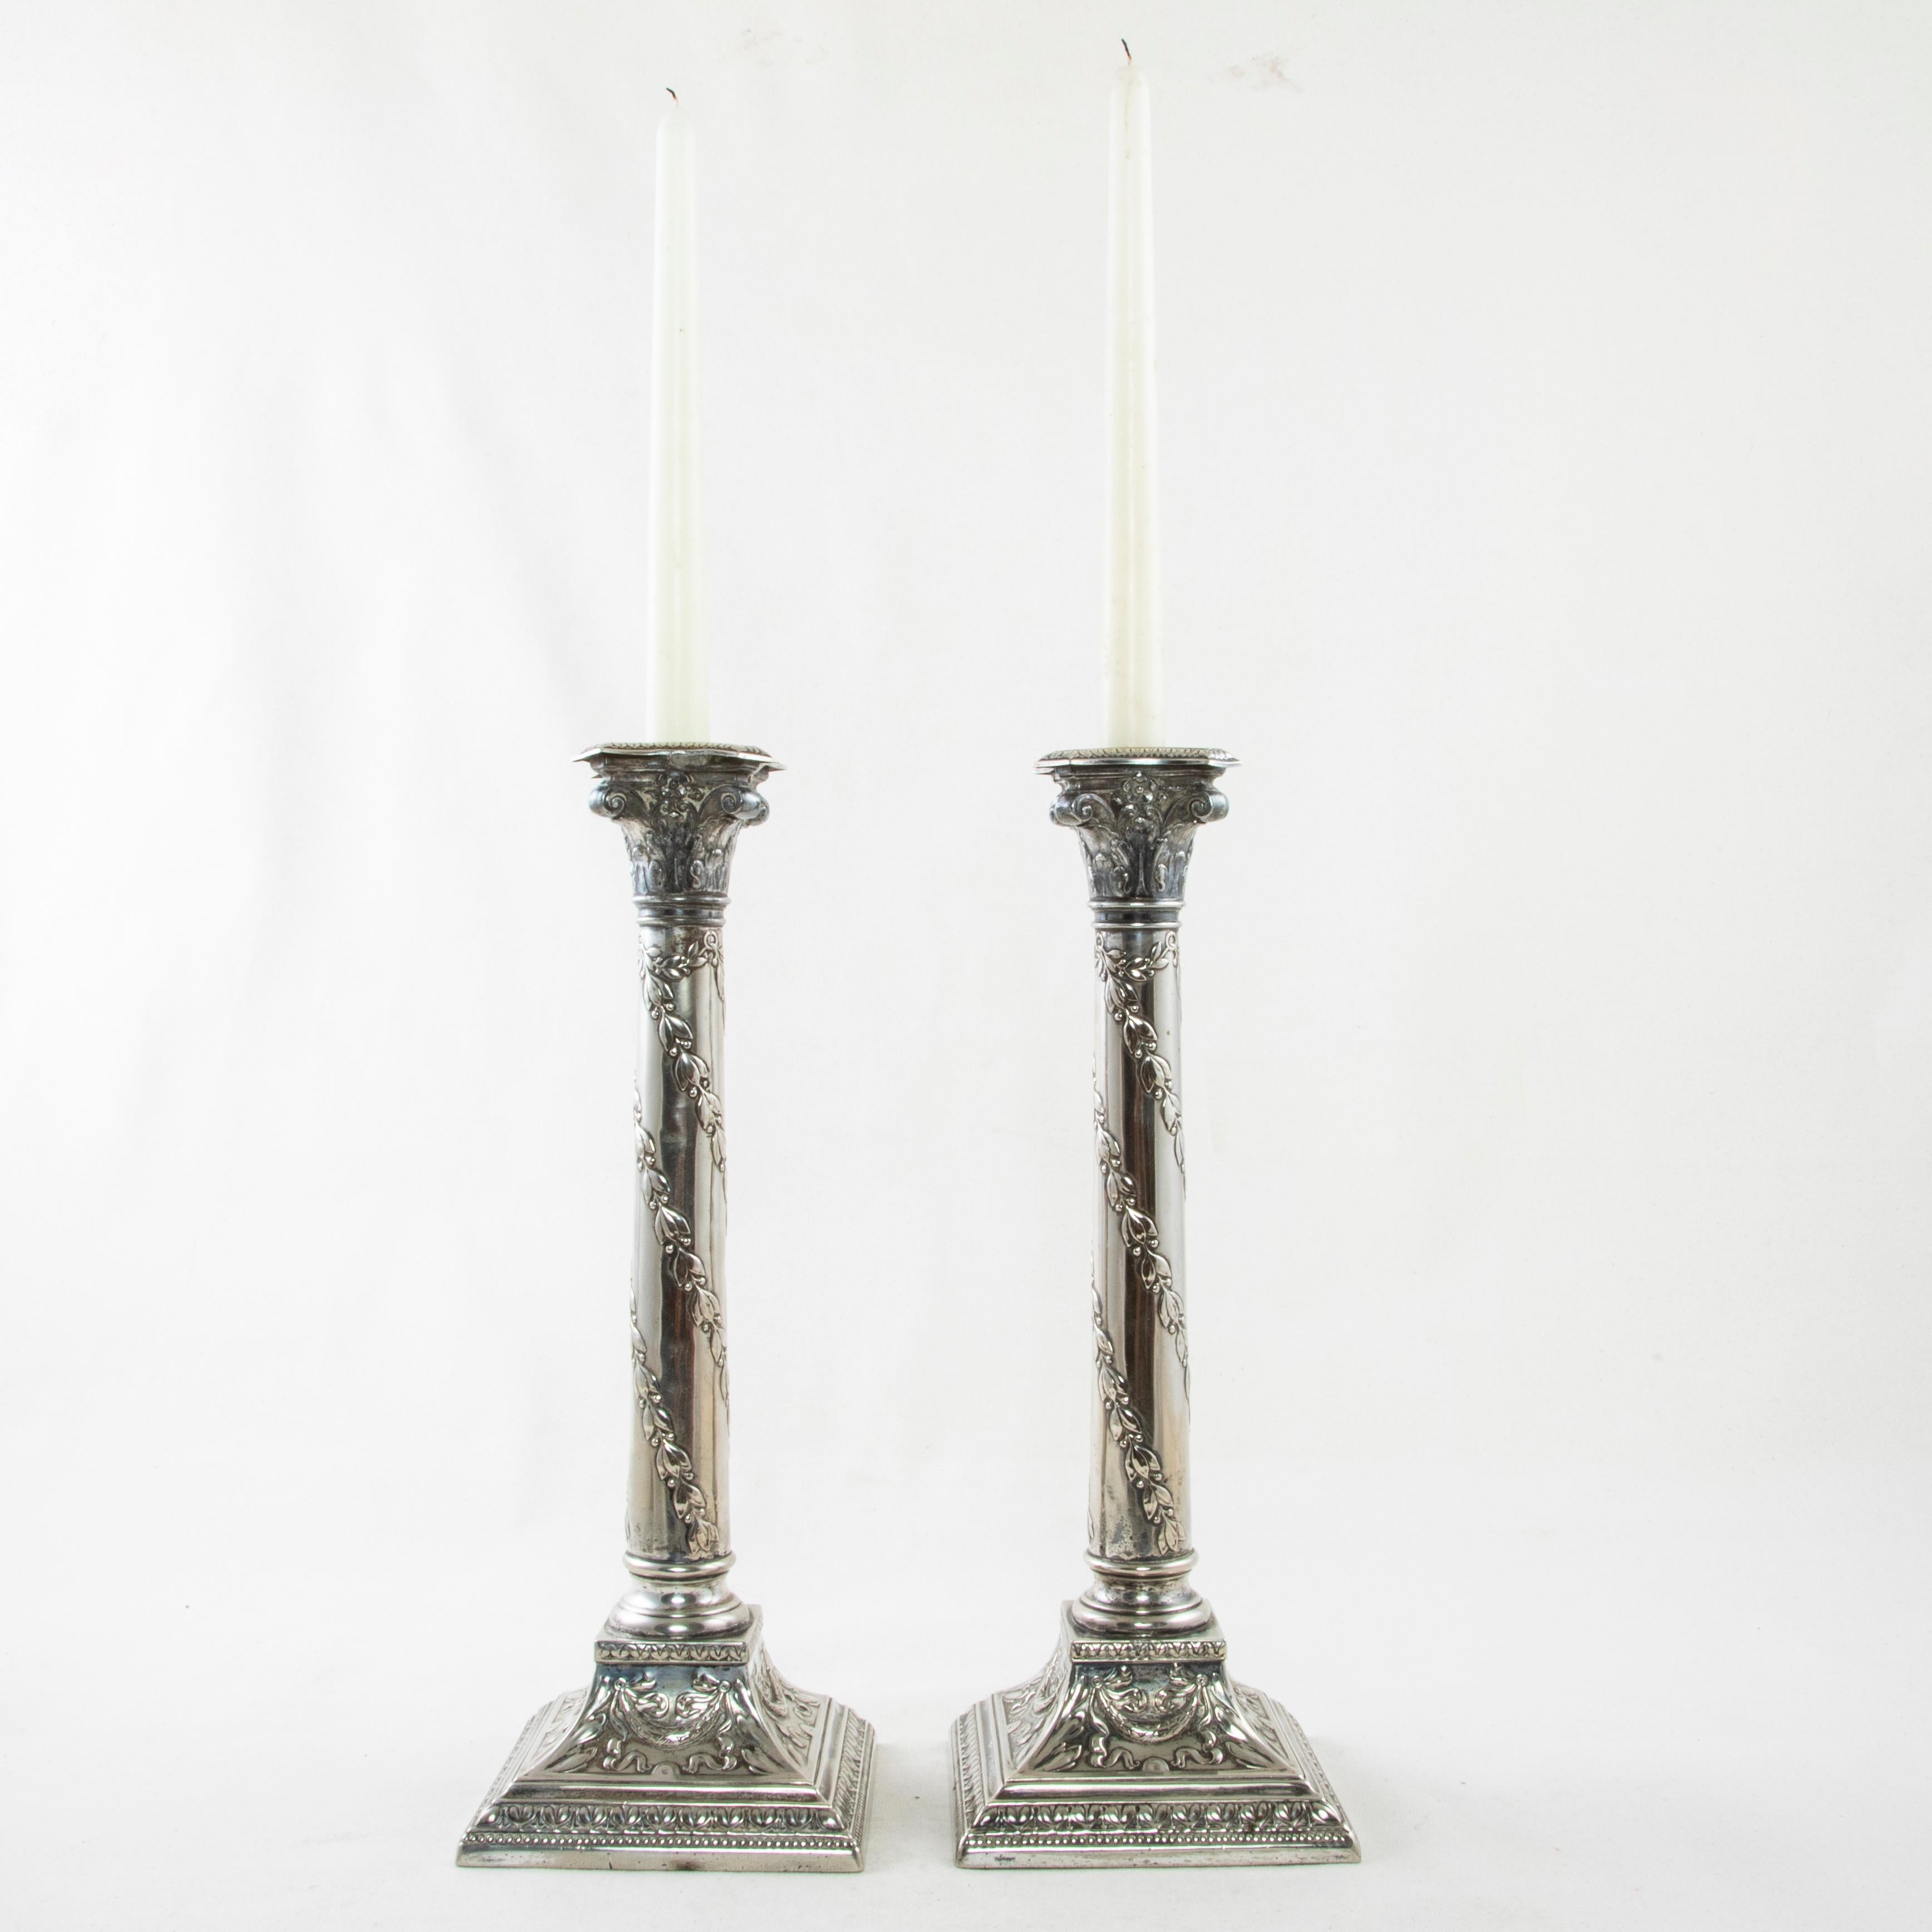 This pair of late 19th century 13 inch tall silver plate candlesticks from Romania features Classic Louis XVI motifs. Each candlestick takes the form of a column with a Corinthian capital. A spiraling laurel garland details the central pillar. Its